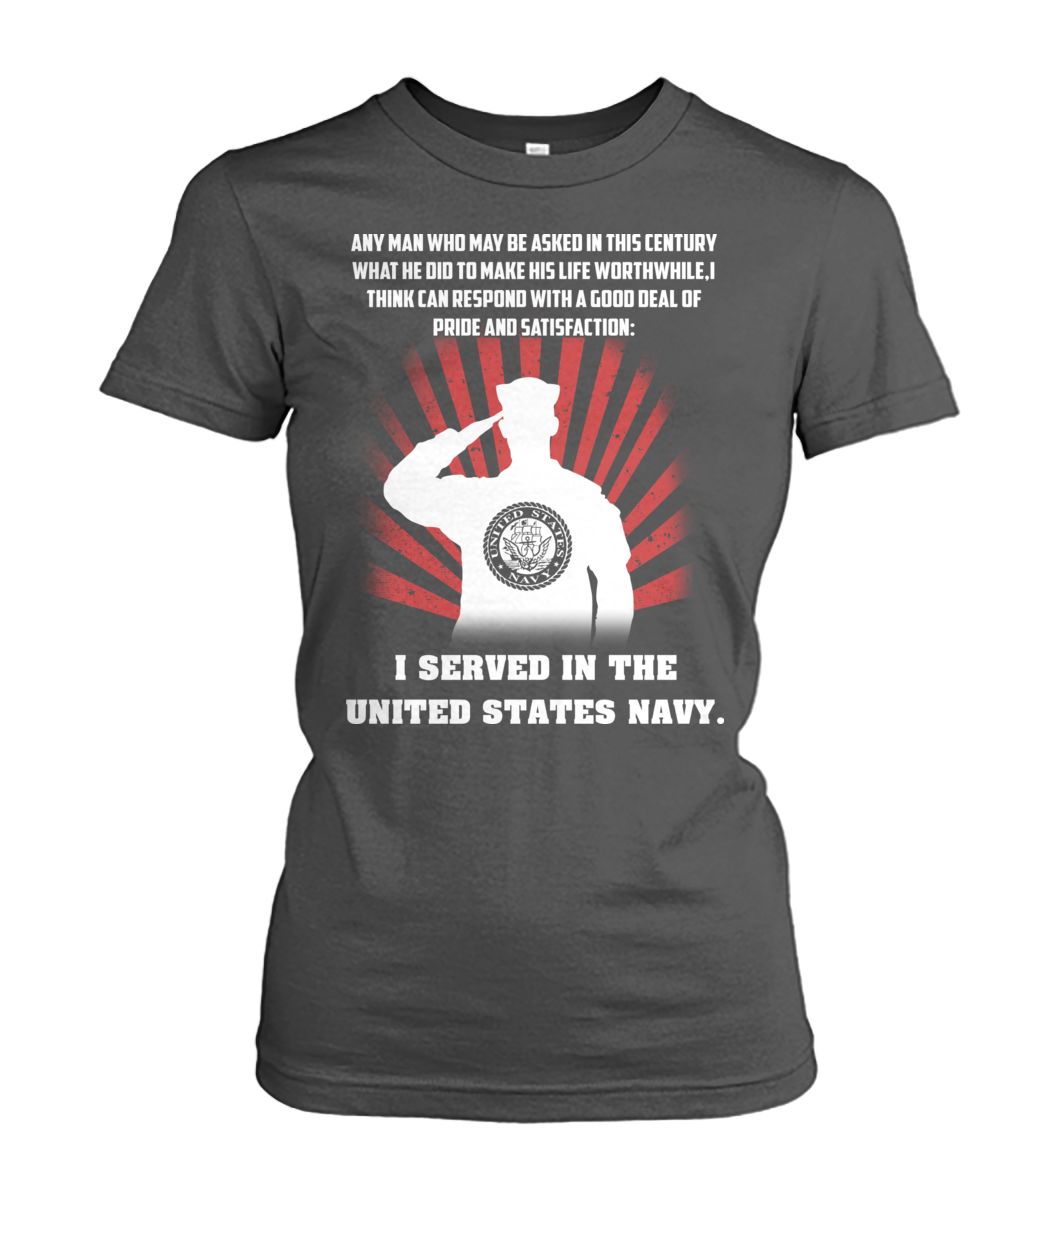 US sailor army any man who may be asked in this century what he did to make his life worthwhile women's crew tee